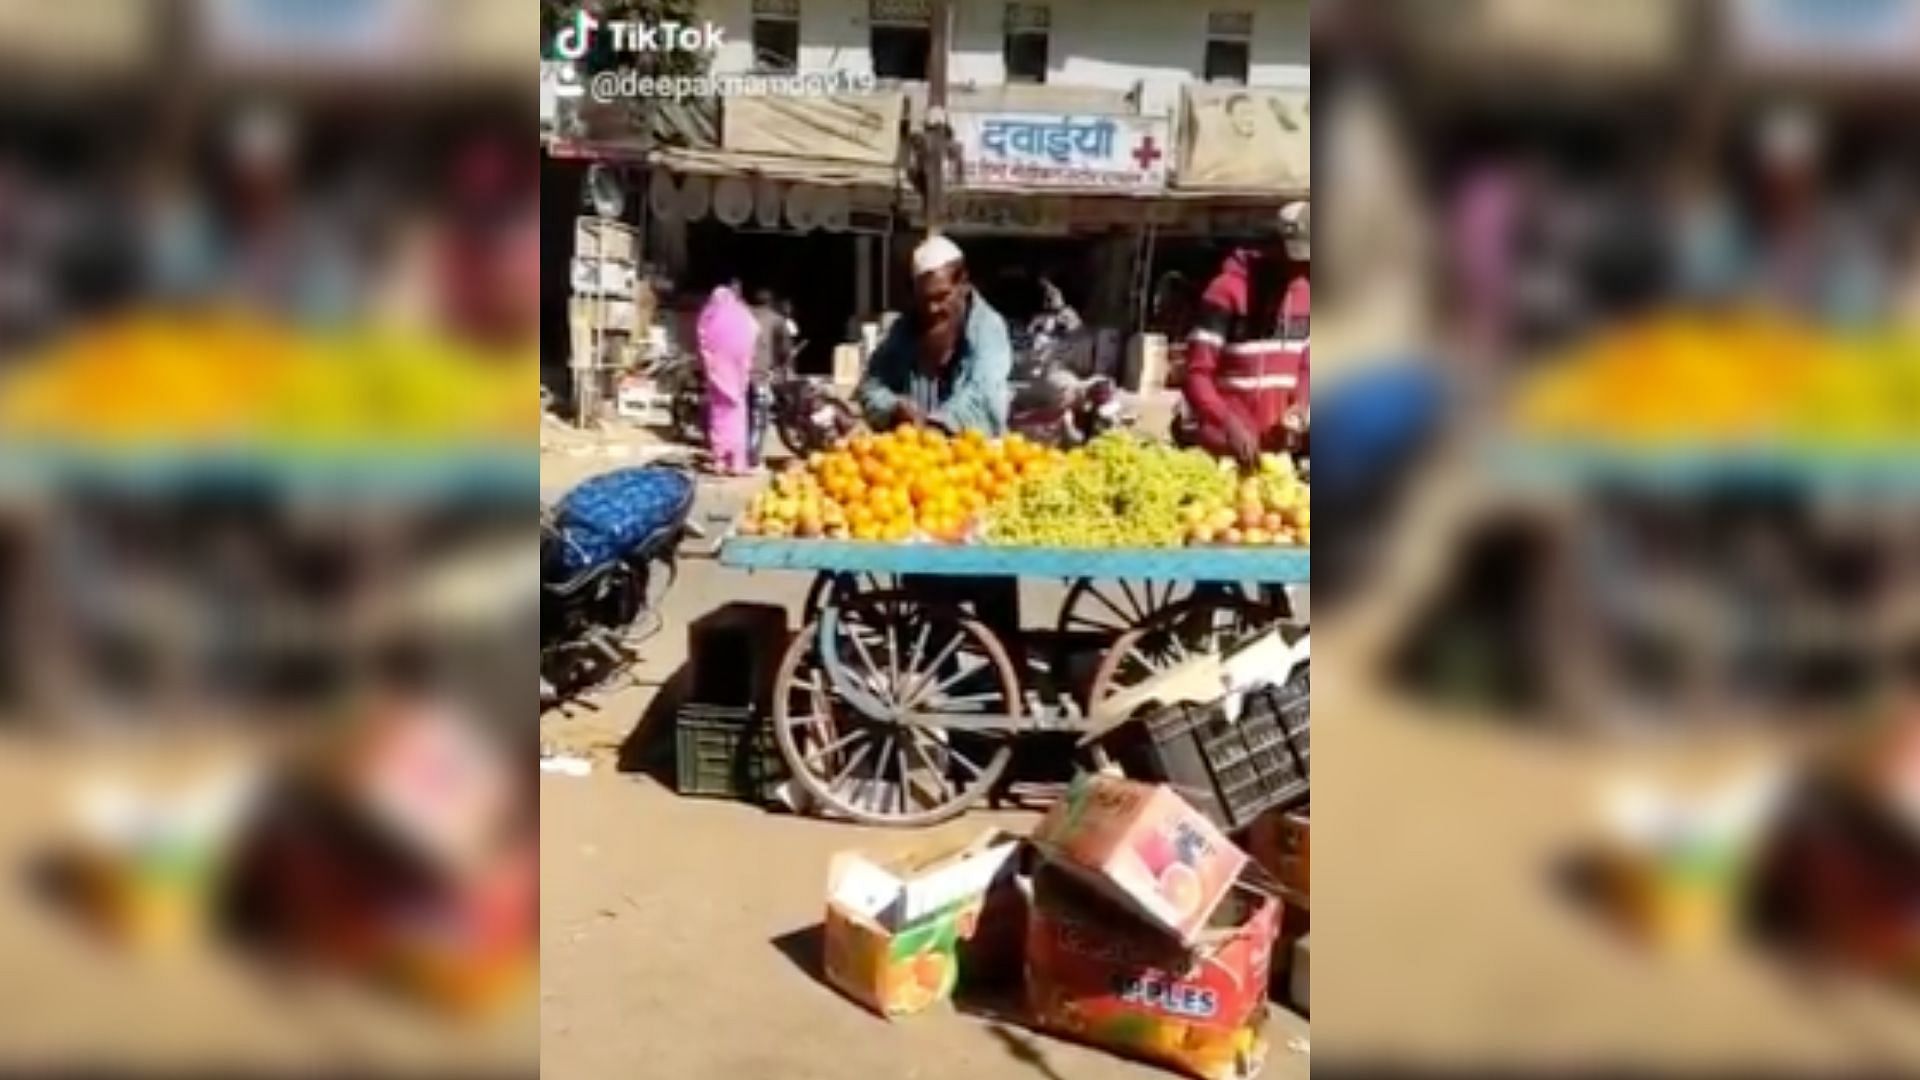 A viral video on social media shows a man in Madhya Pradesh’s Raisen district allegedly spitting on the fruits that he was selling.